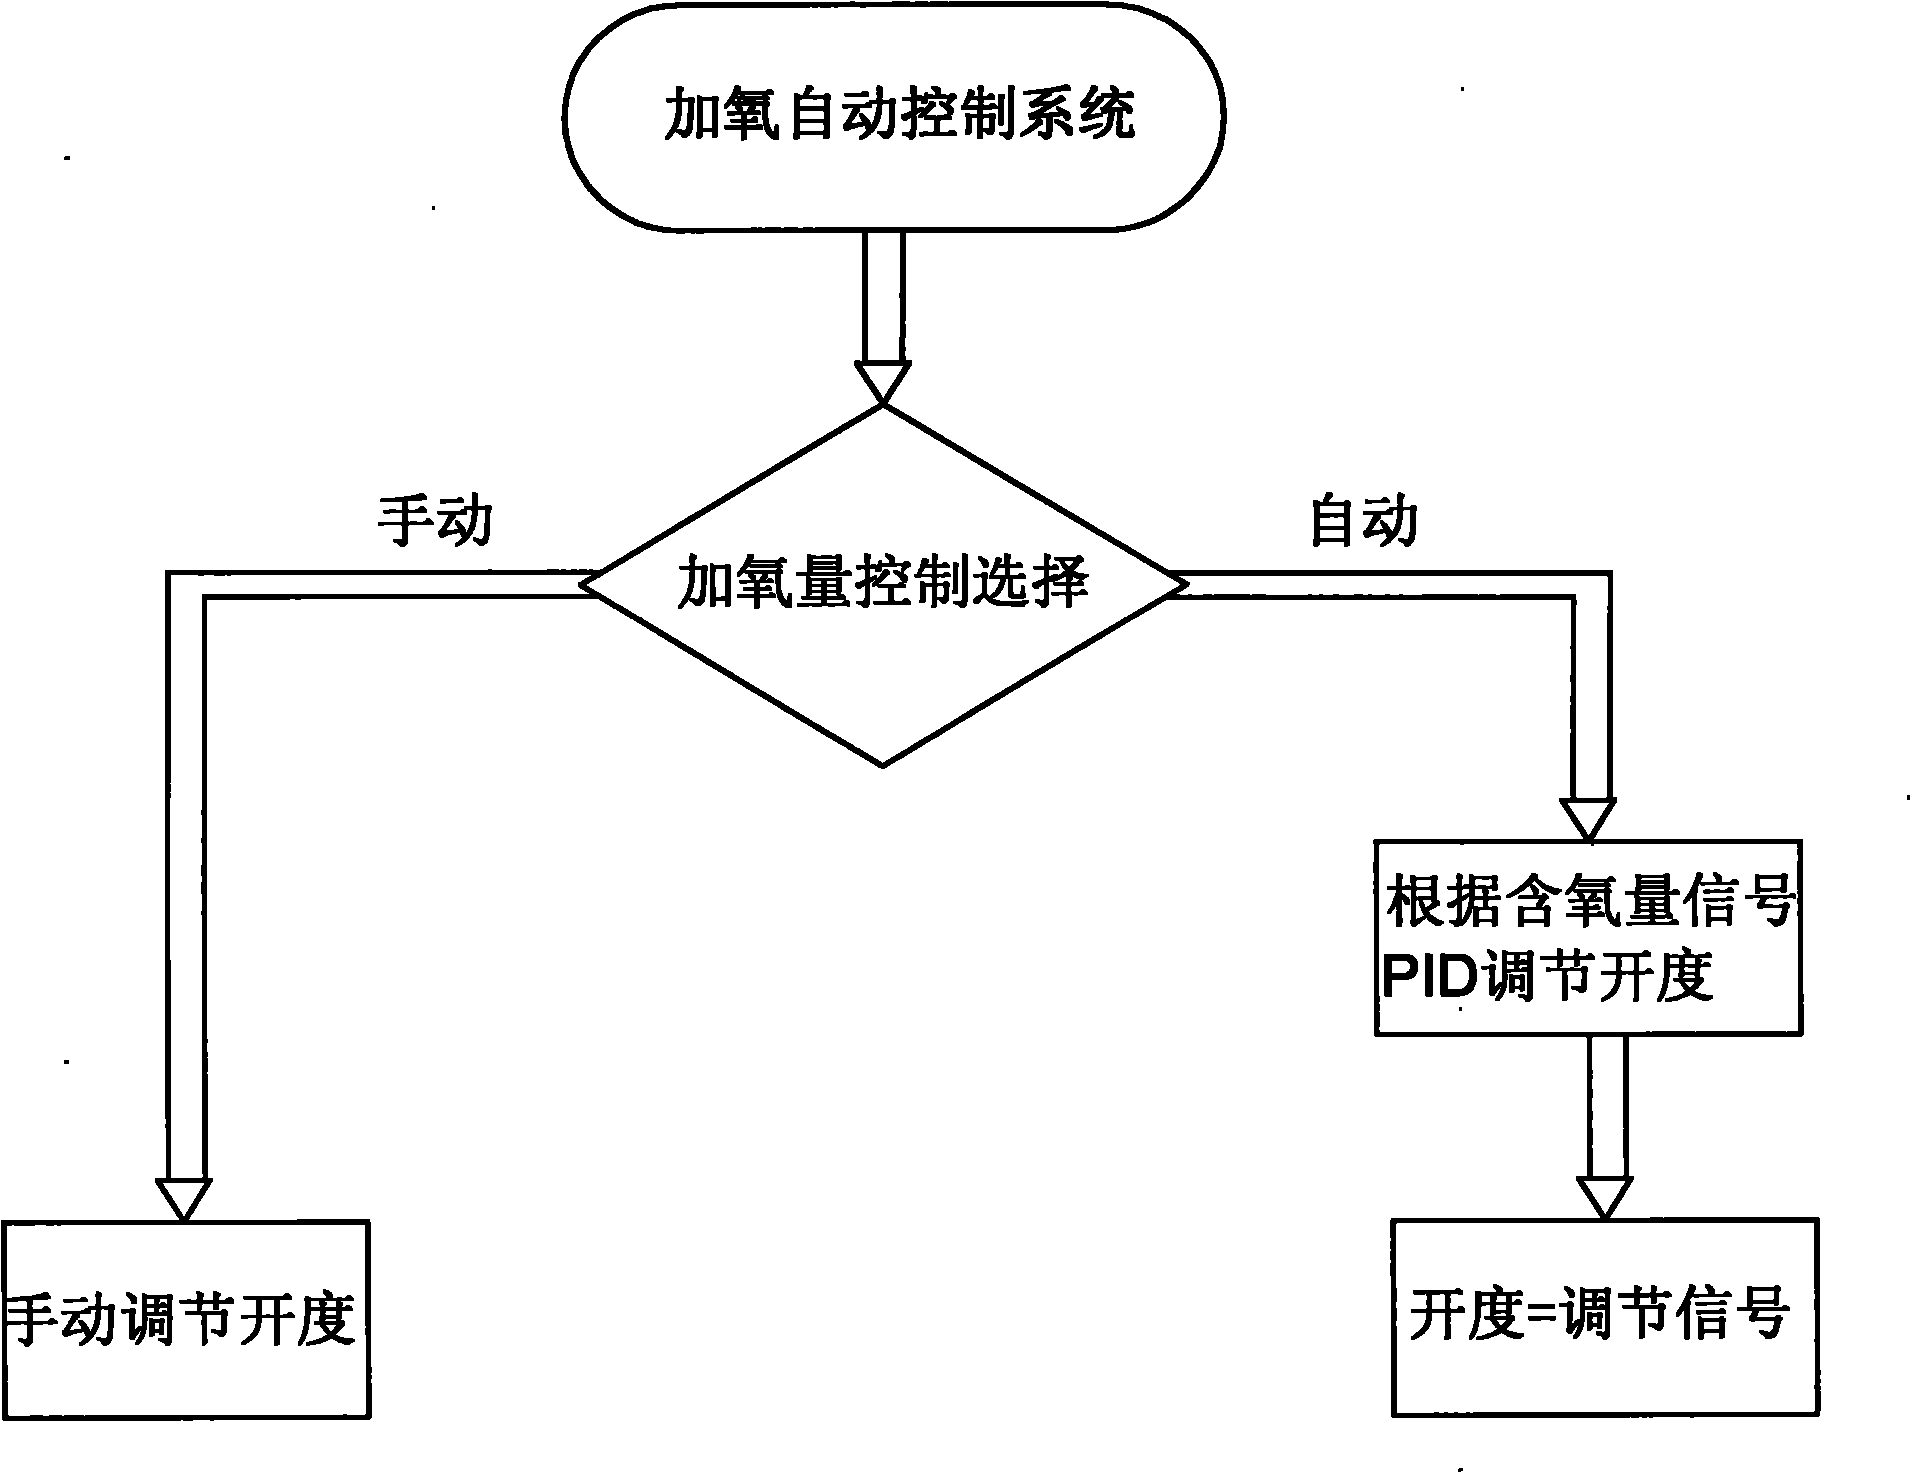 Water and steam pipeline oxygenation control method for power plant